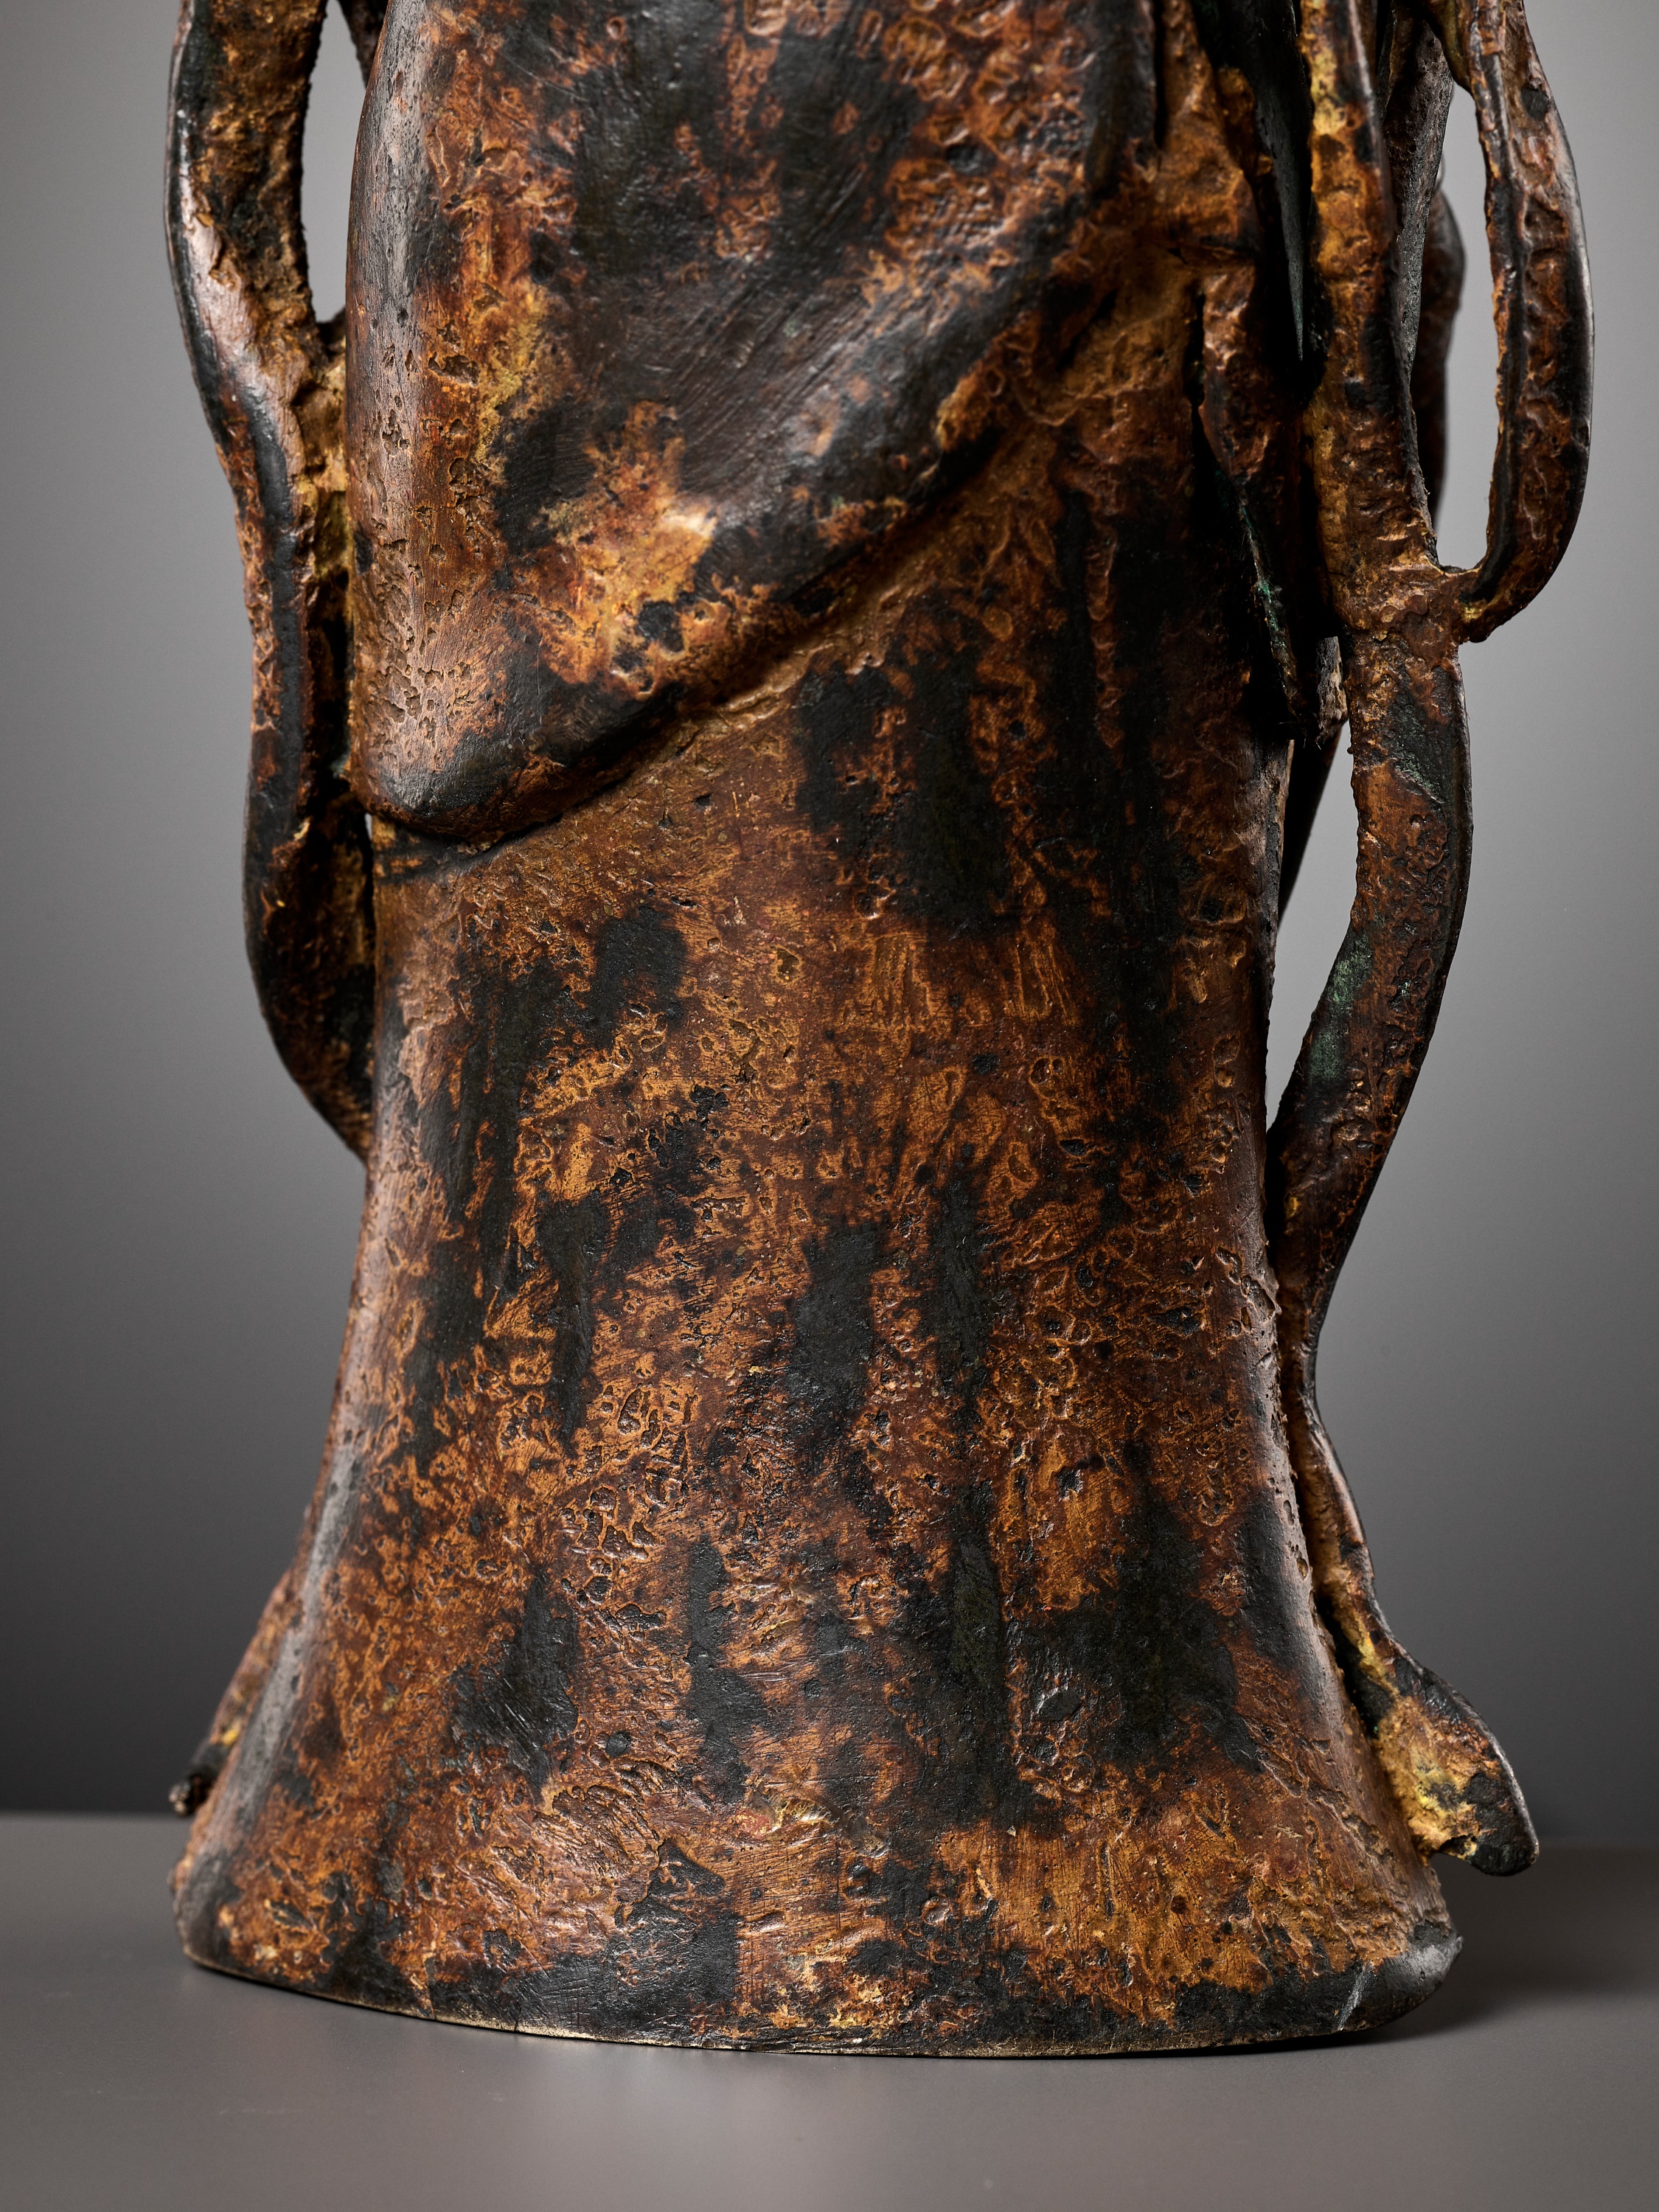 AN EXCEEDINGLY RARE BRONZE FIGURE OF GUANYIN, DALI KINGDOM, 12TH - MID-13TH CENTURY - Image 9 of 20